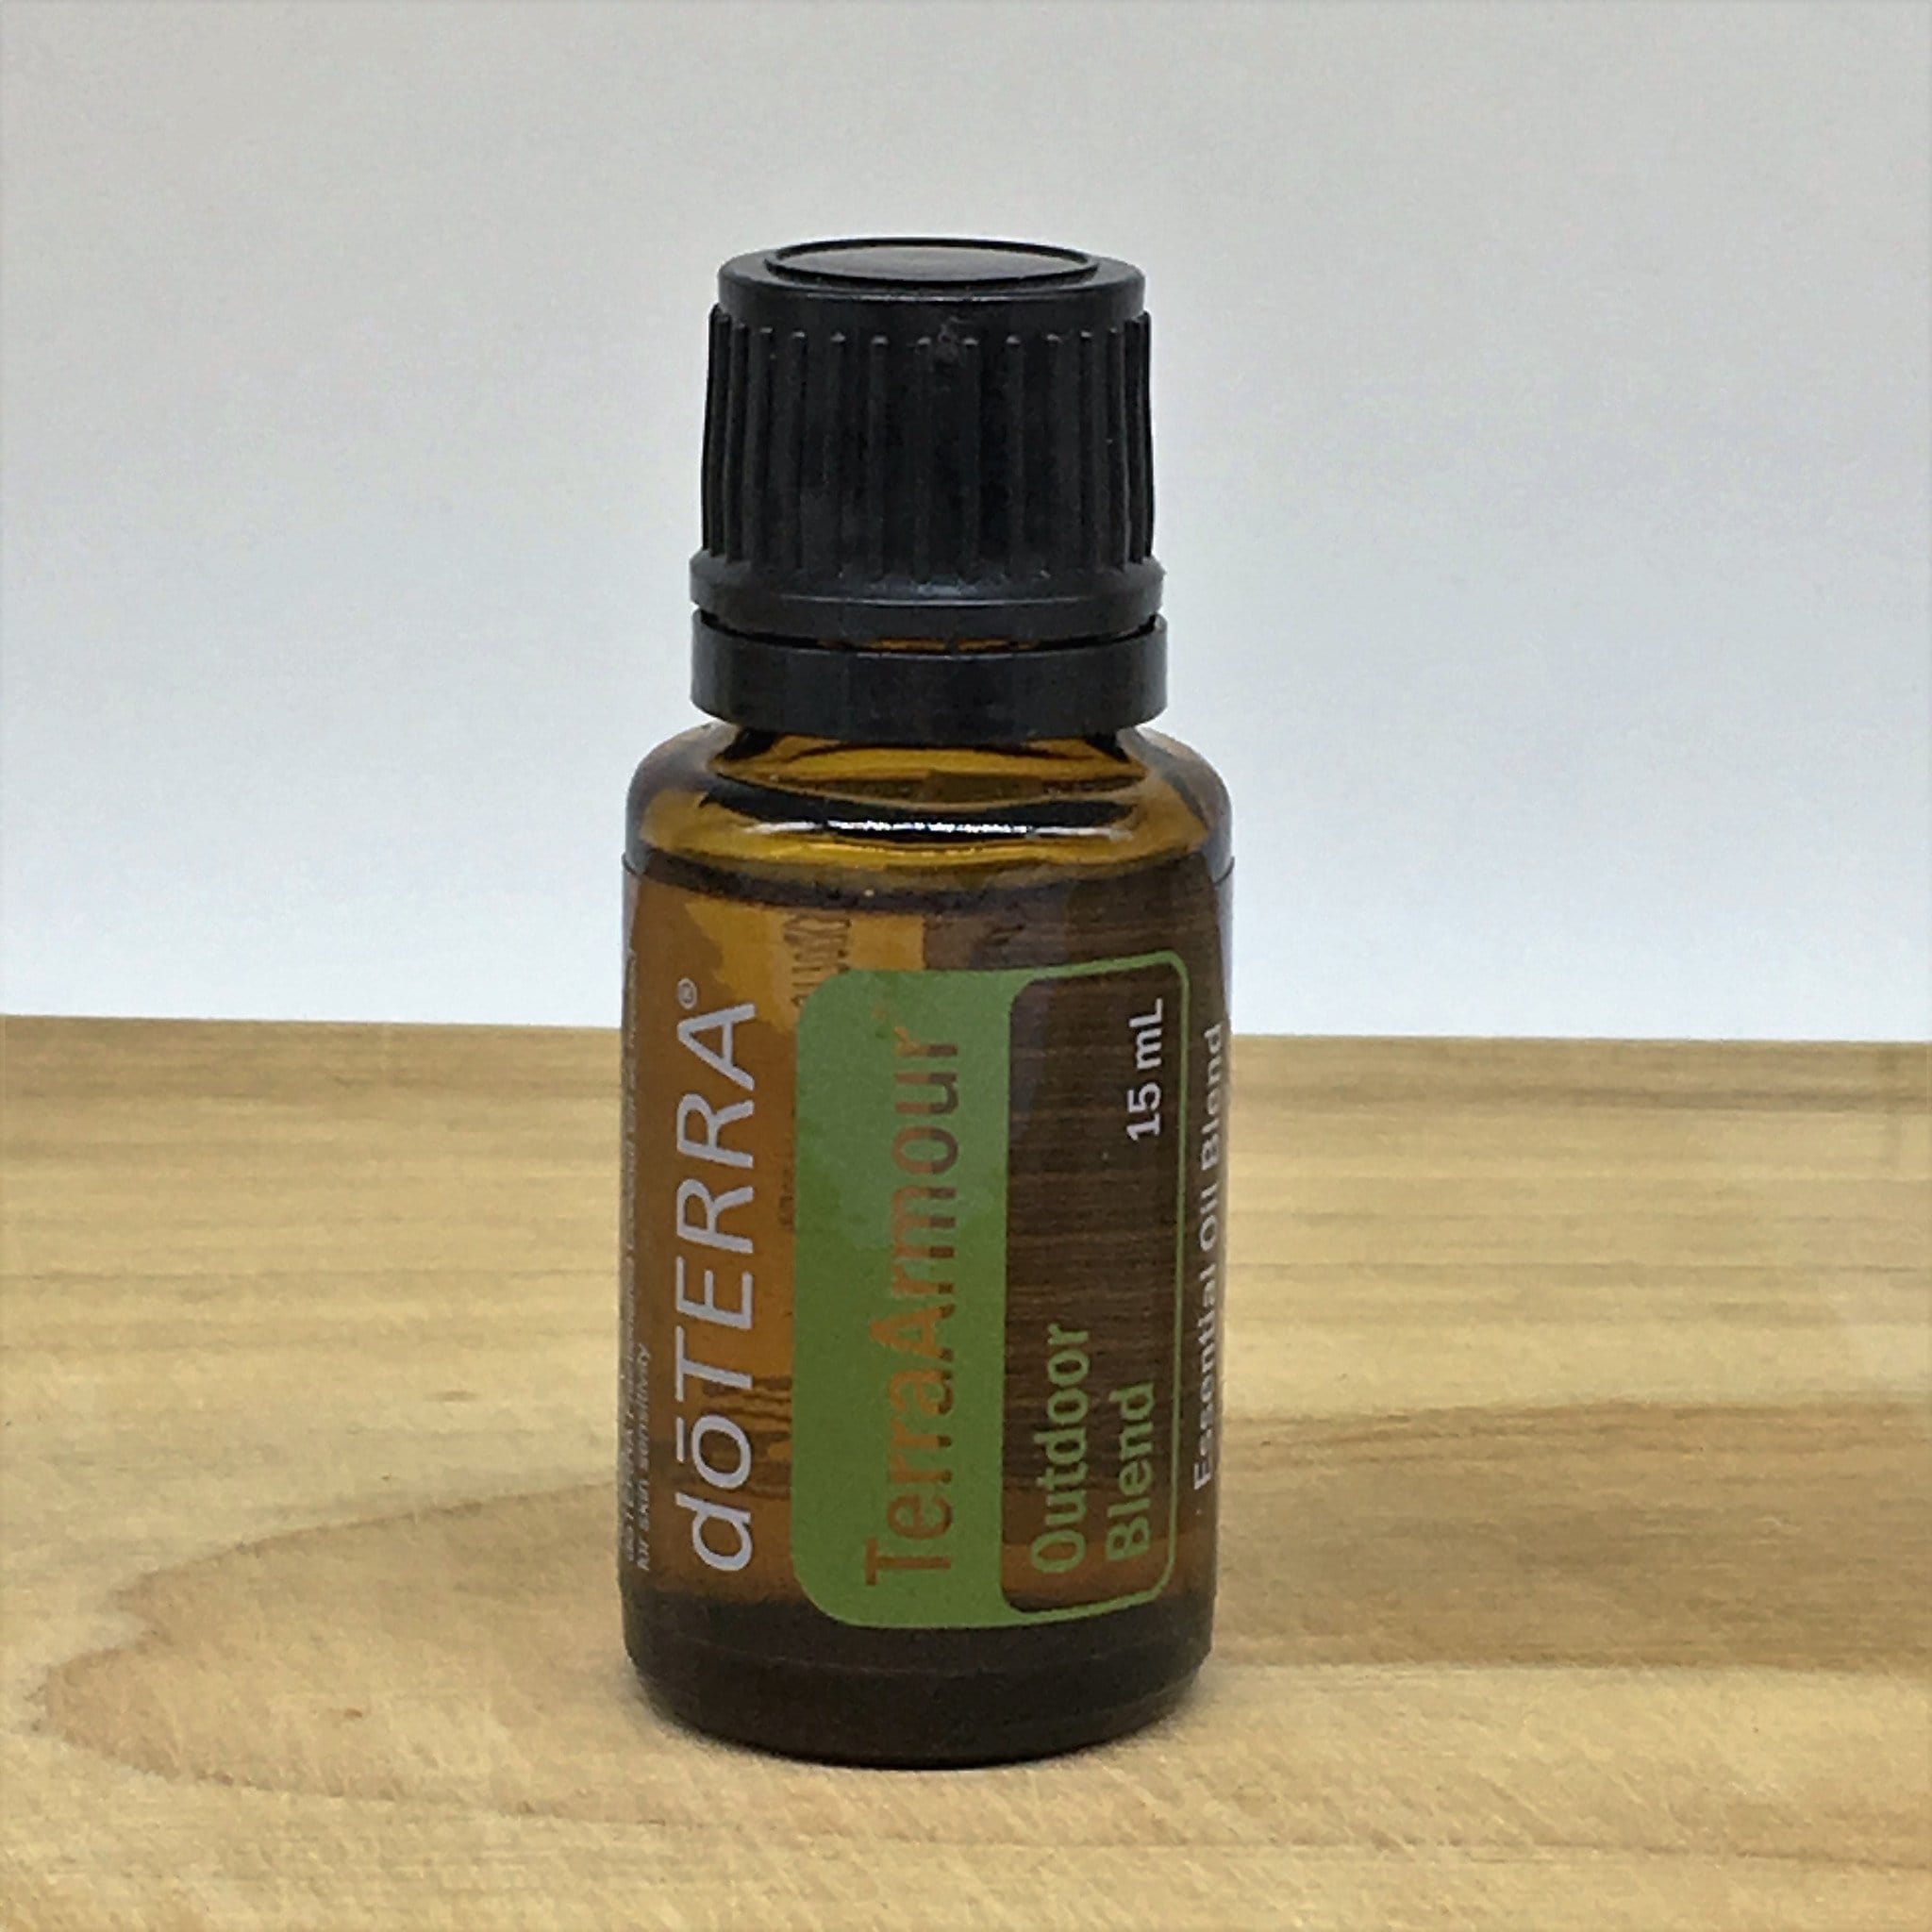 Download doTERRA TerraArmour 15ml Essential Oil - Earth And Soul